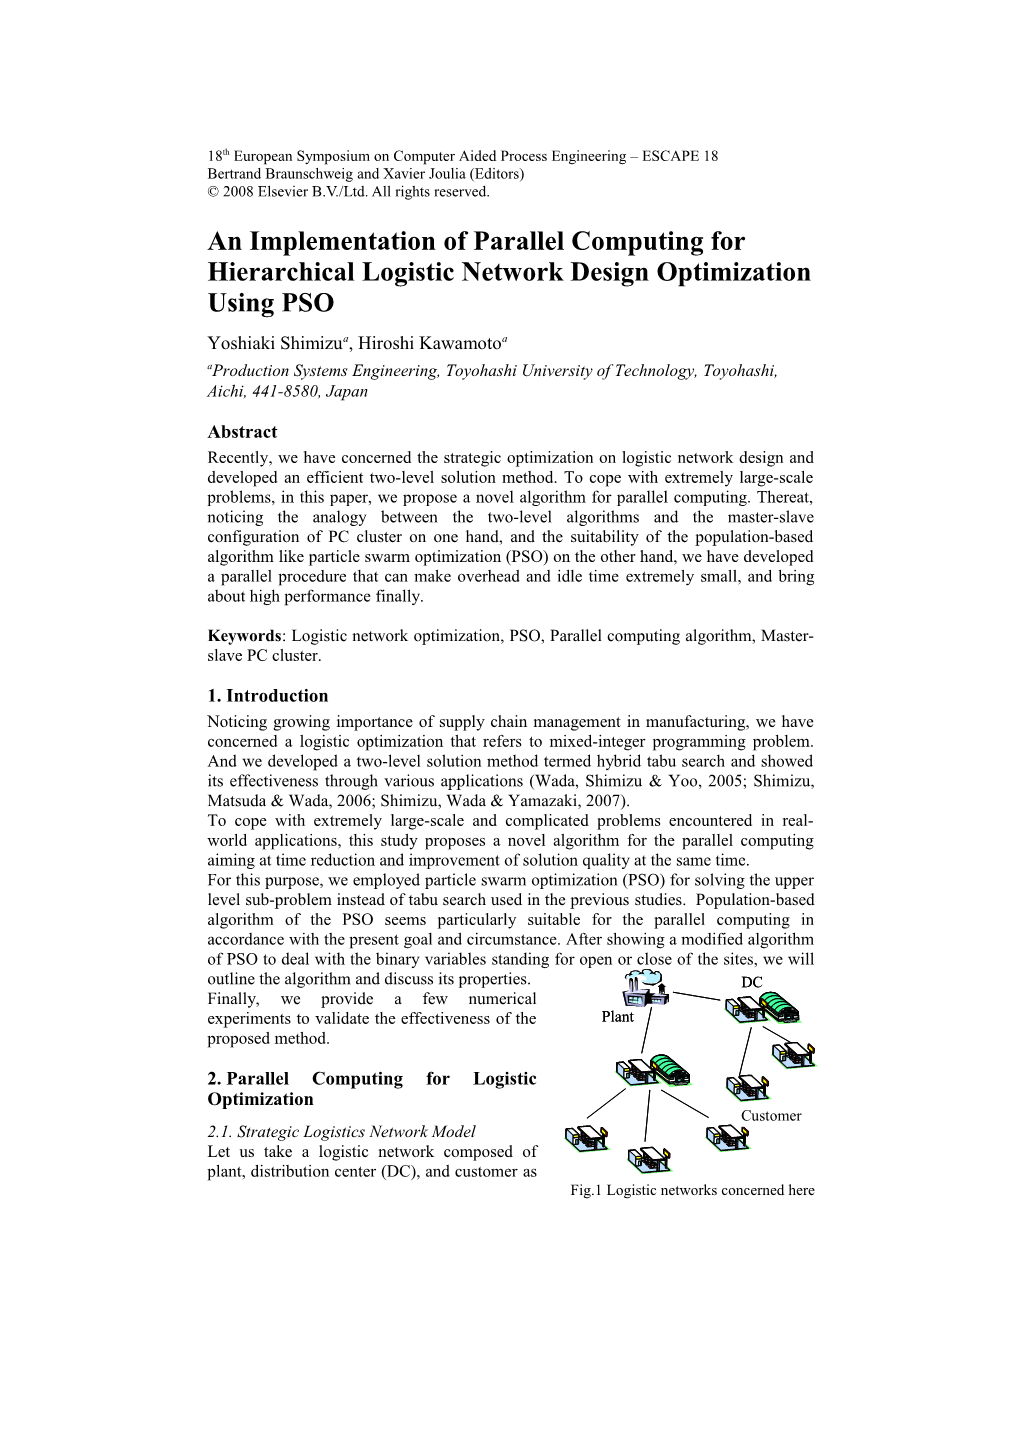 An Implementation of Parallel Computing for Hierarchical Logistic Network Design Optimization